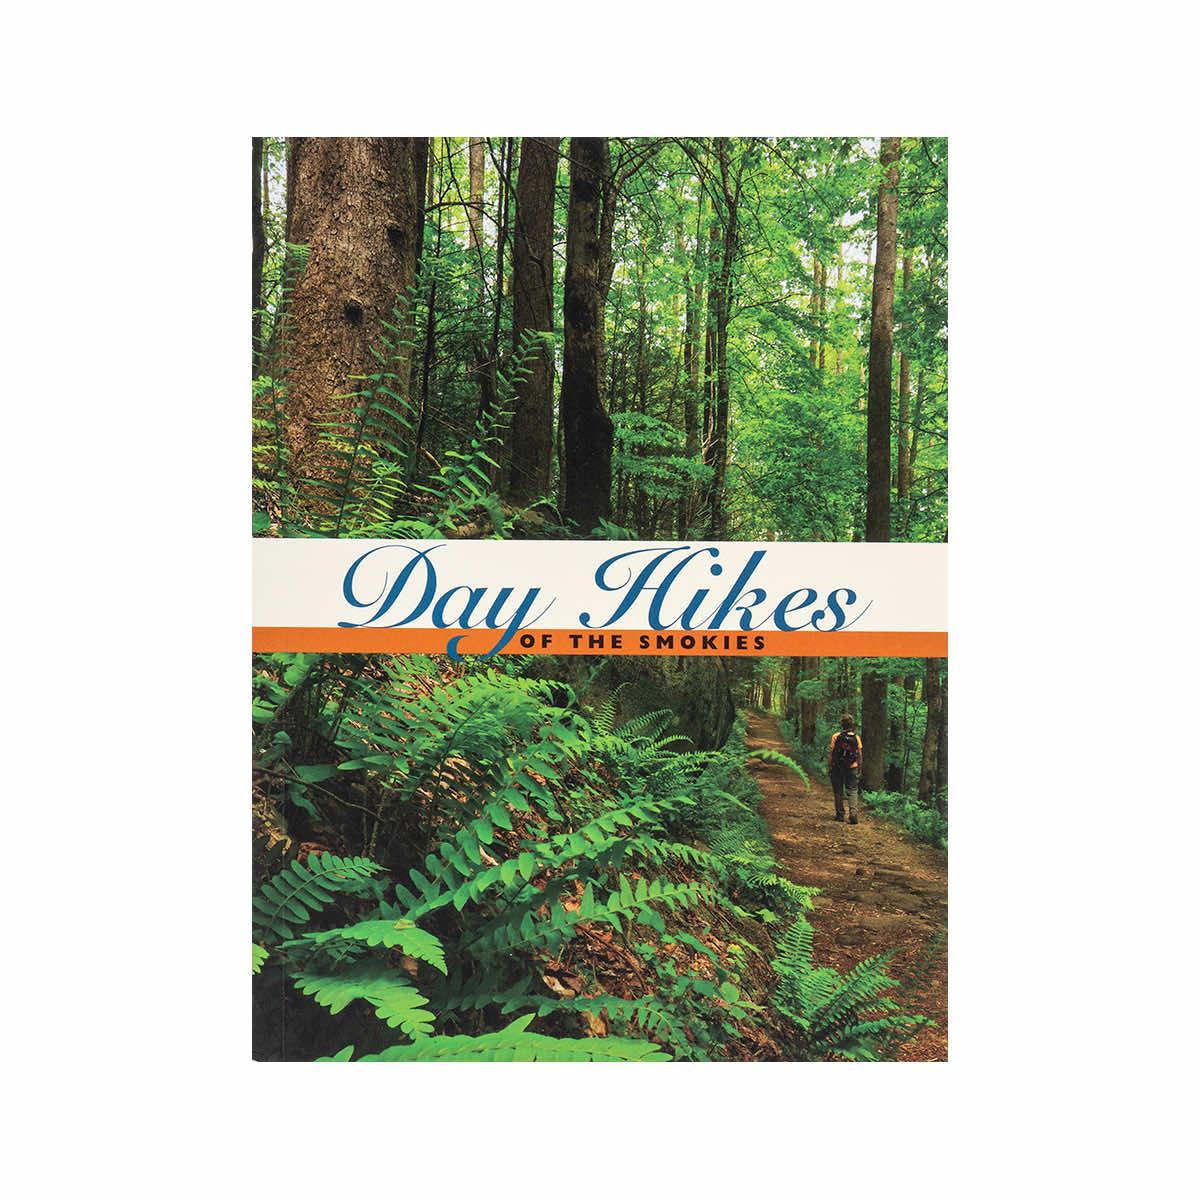  Day Hikes Of The Smokies Book